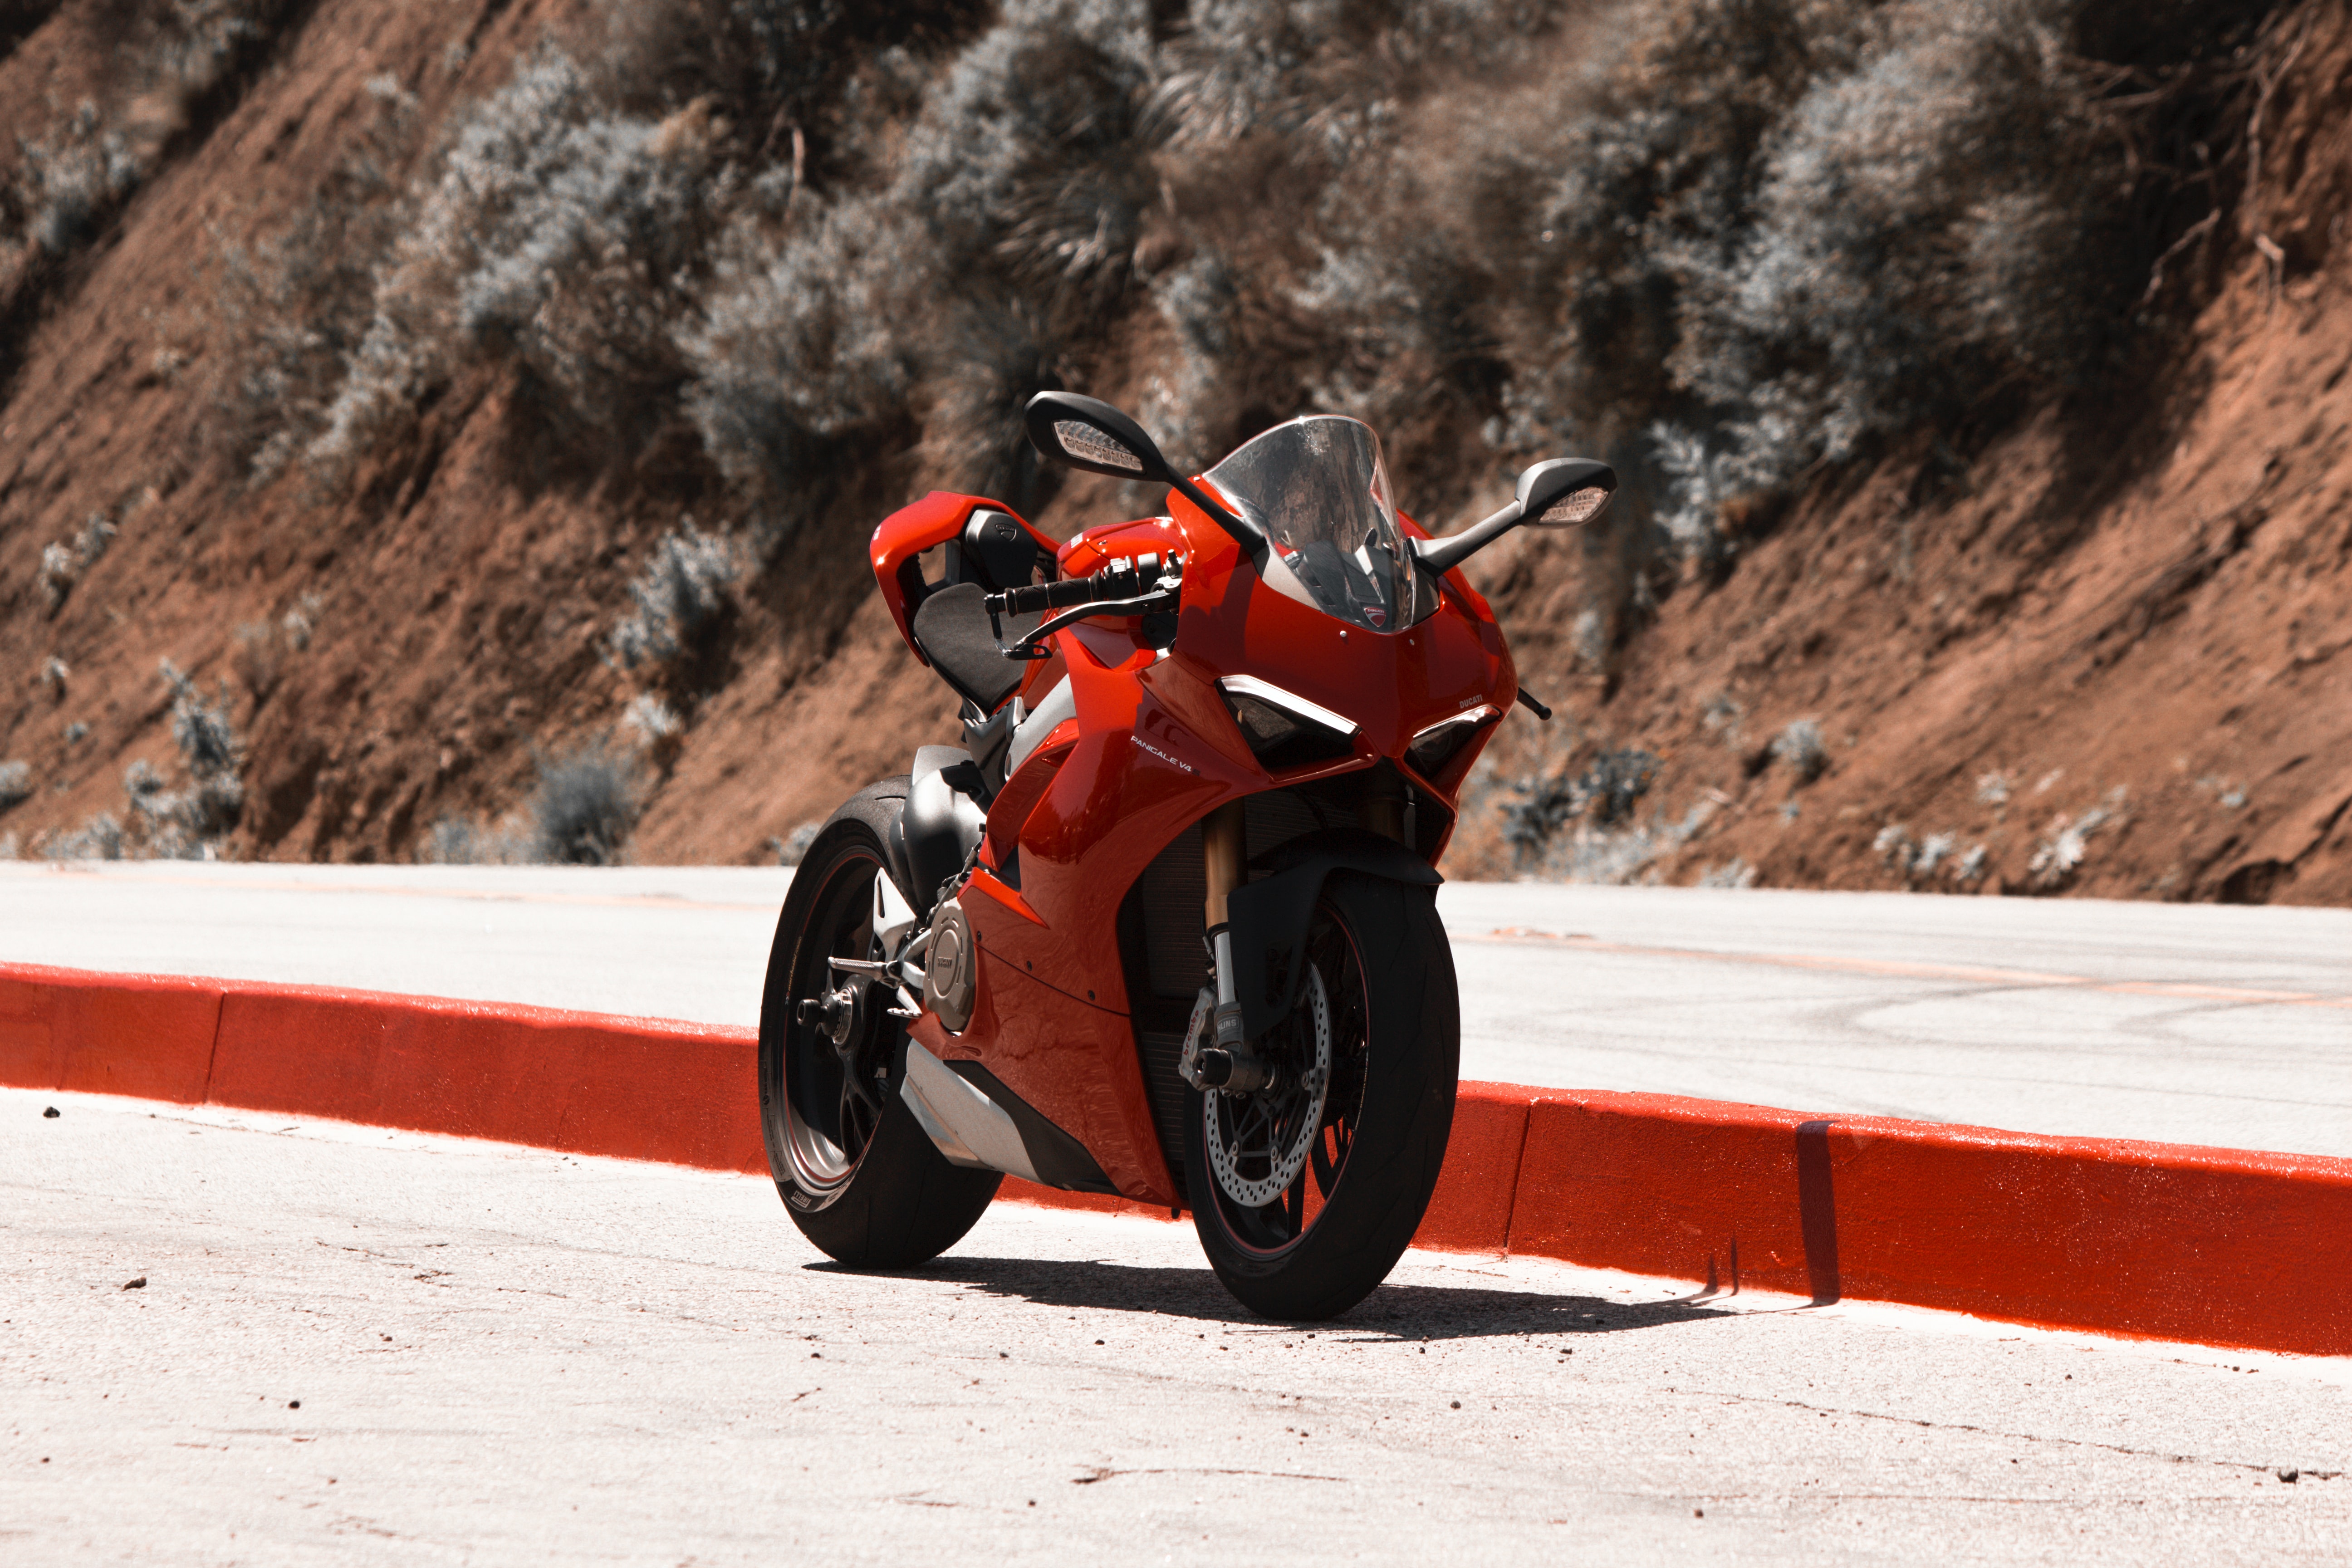 bike, sportbike, motorcycle, sport bike, motorcycles, red